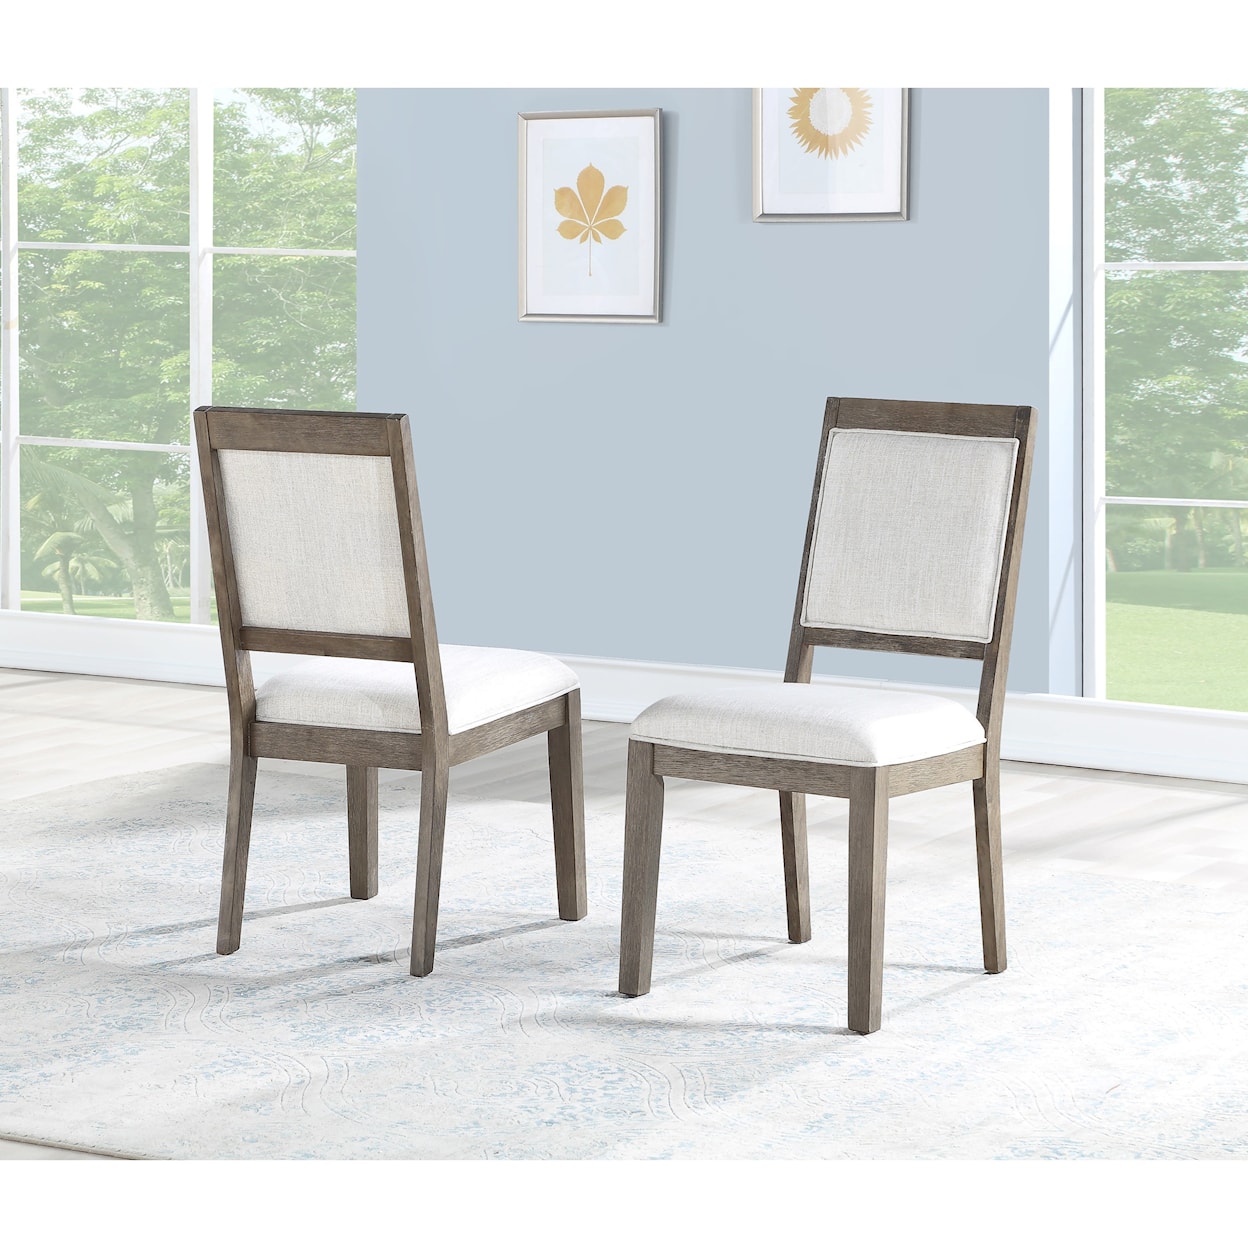 Steve Silver Molly 5 Piece Table and Chair Set